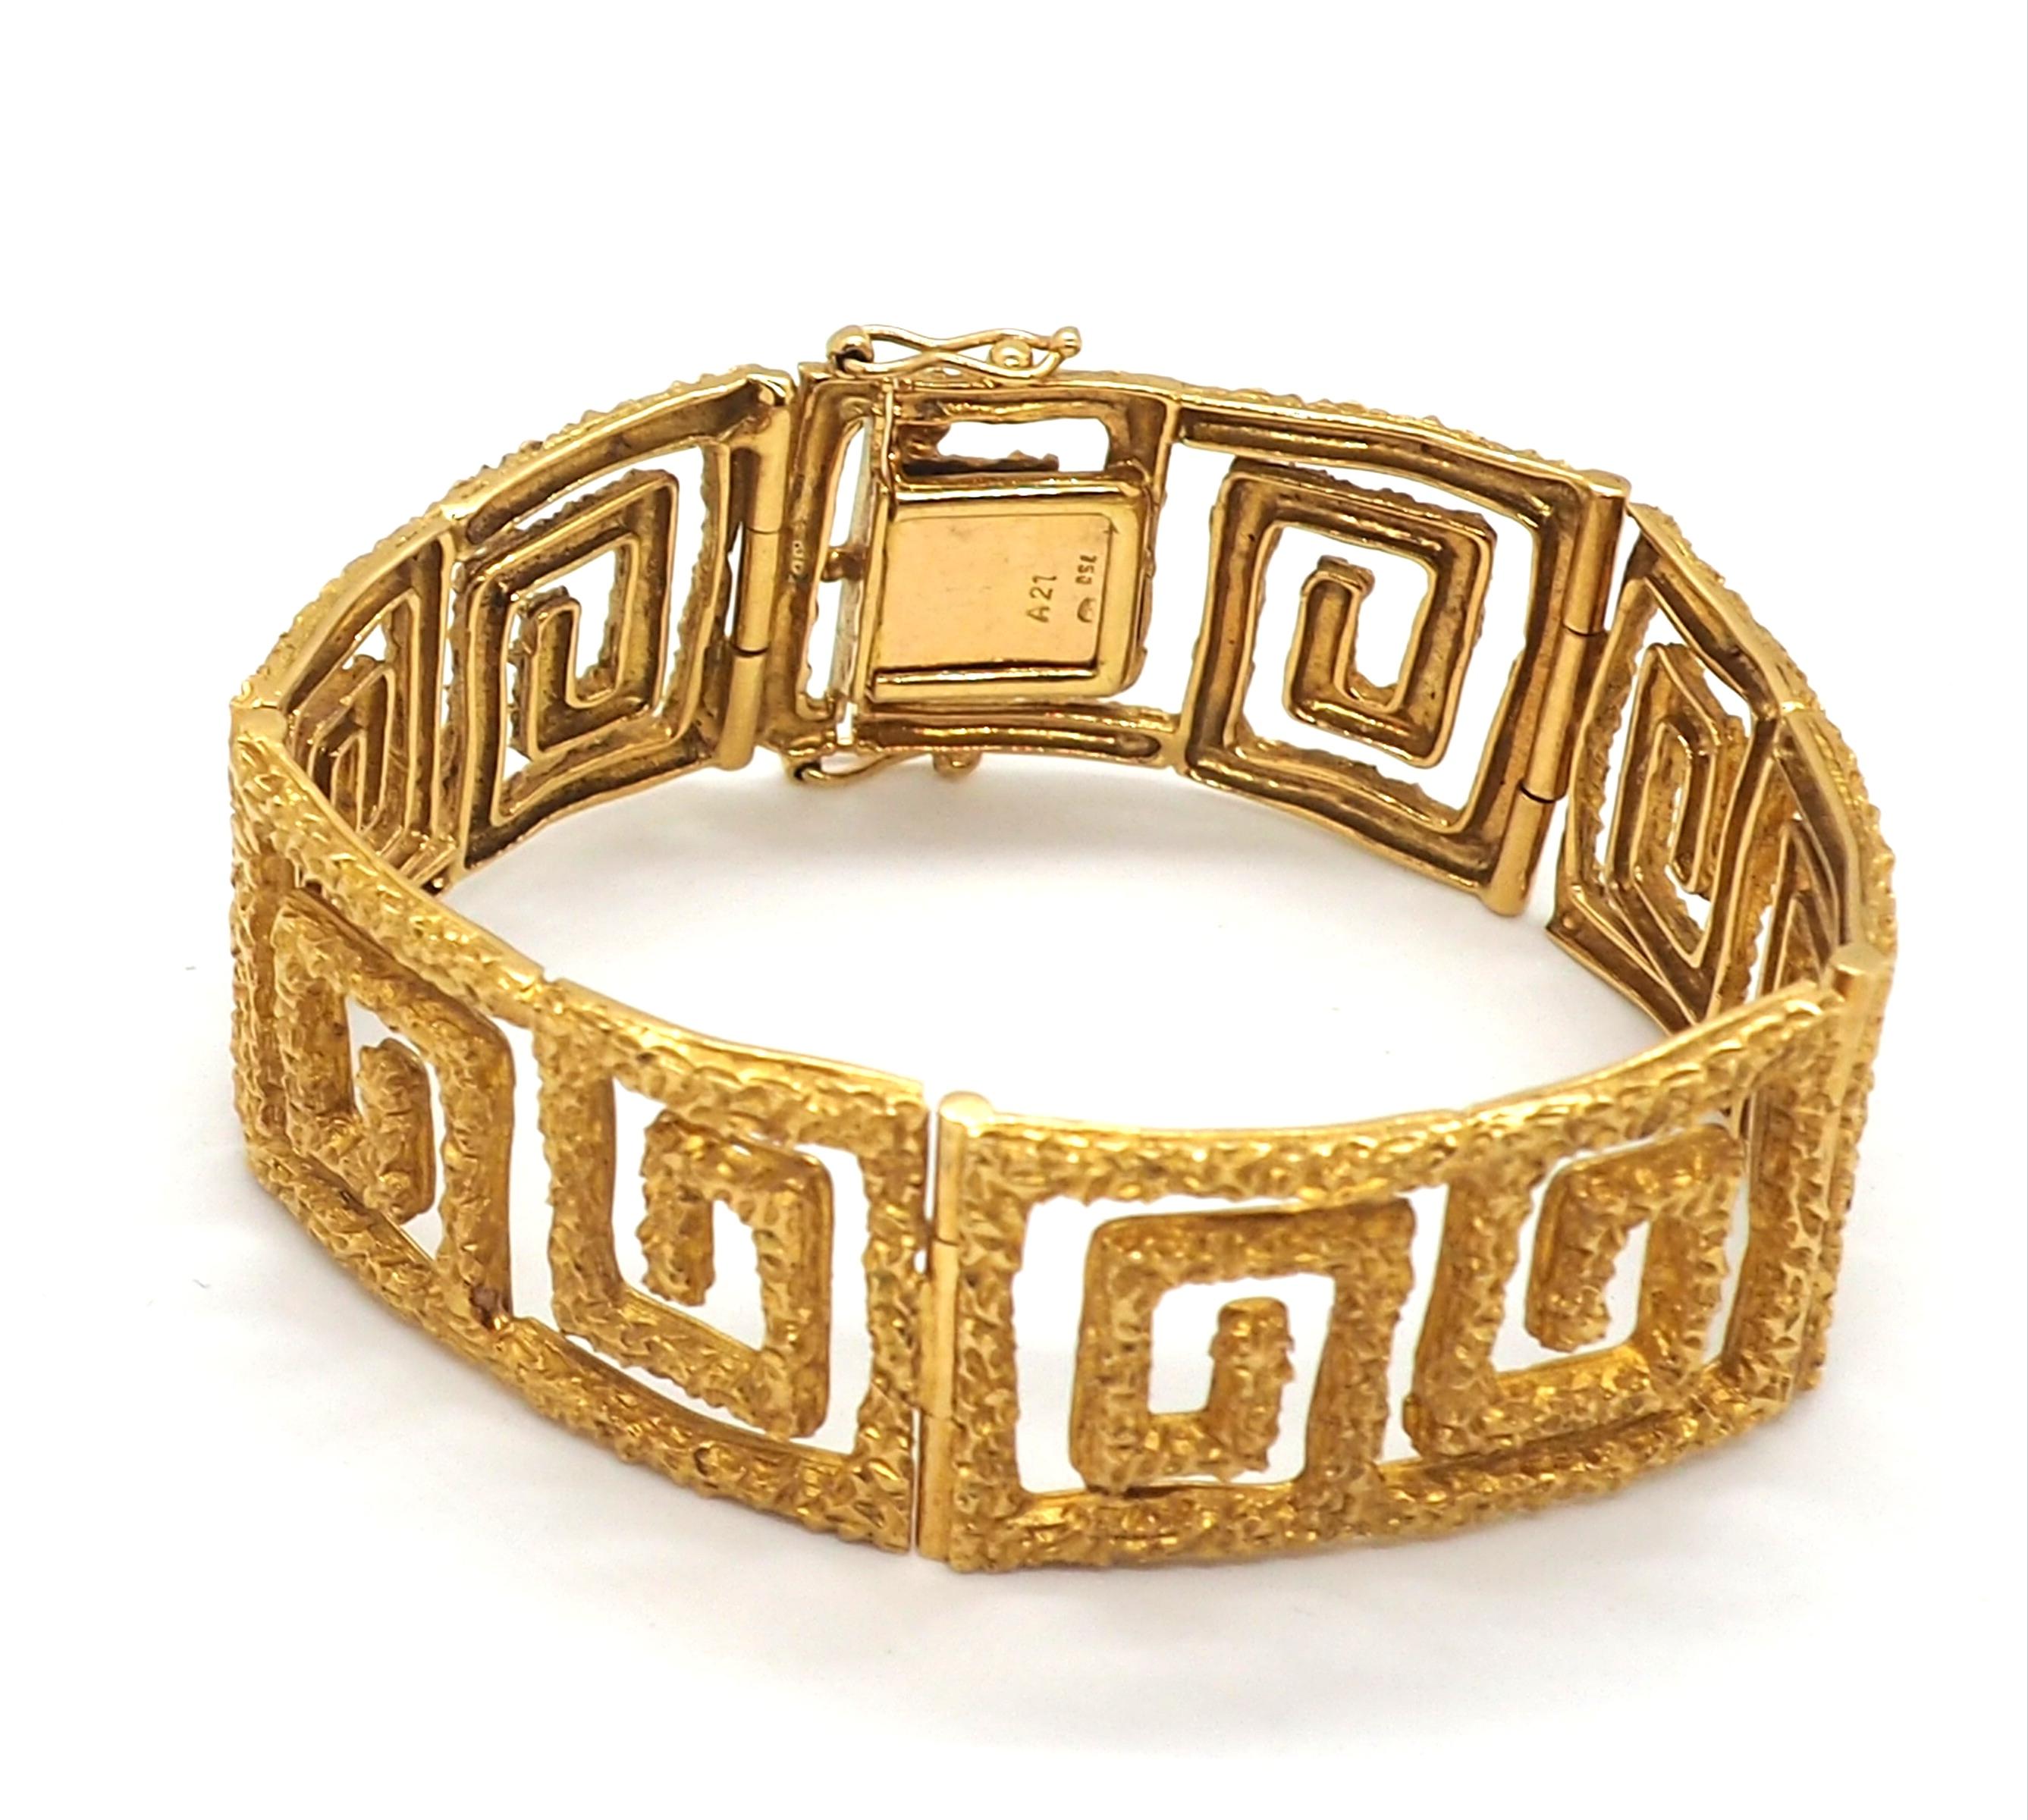 Introducing an extraordinary cuff bracelet made in 18 karat yellow gold, meticulously crafted in a captivating meander, also known as the Greek fret design. This bracelet is not only a piece of jewelry but a symbol of heritage and